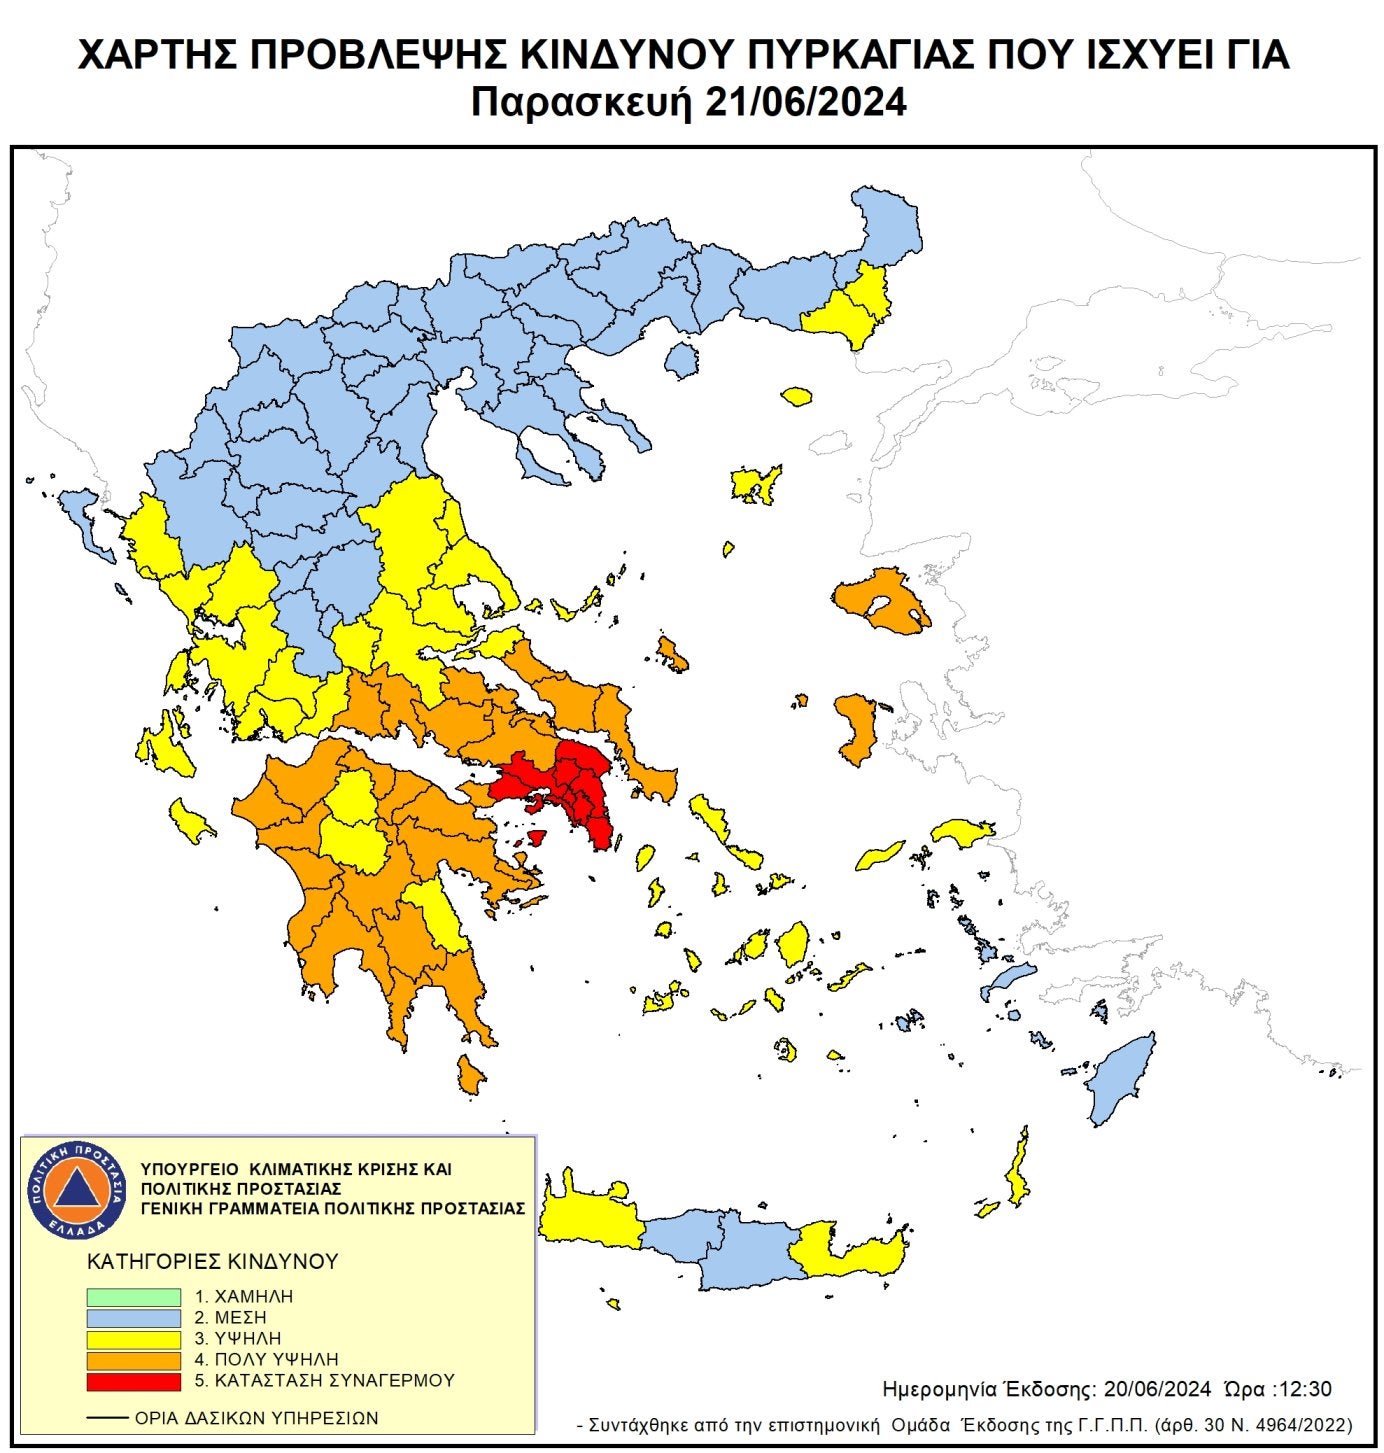 The wildfire warning map for Greece on Friday